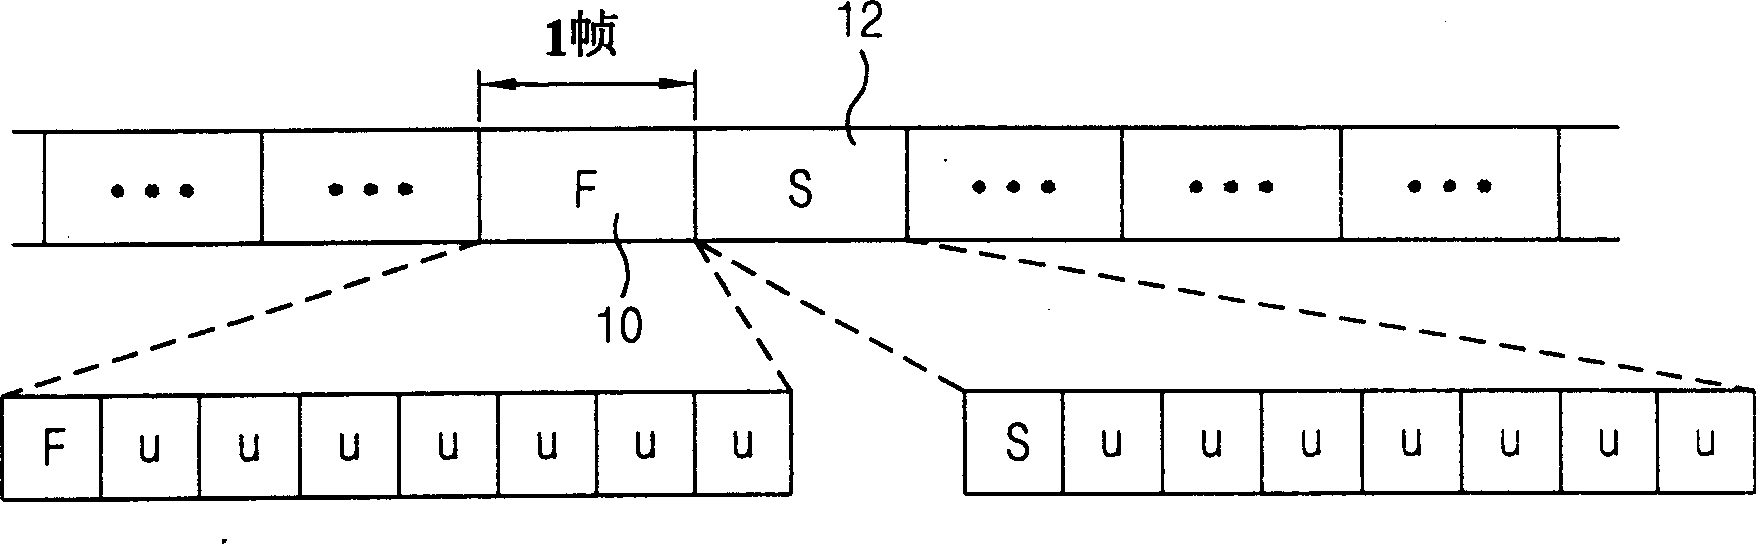 Housing estate selecting system and method for radio communication network